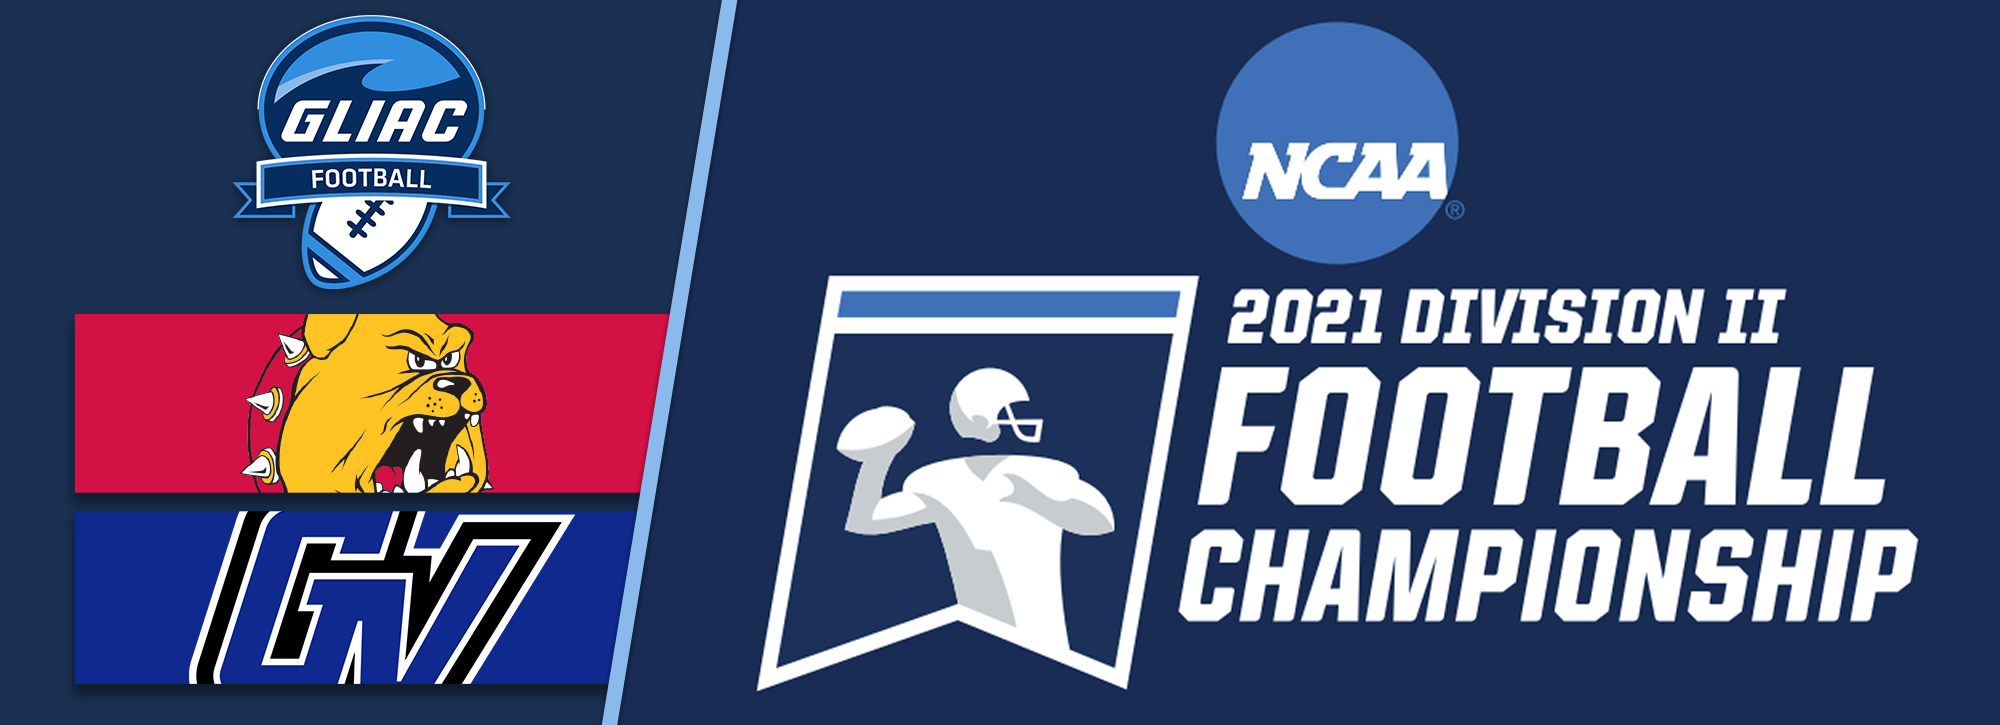 Ferris State and Grand Valley State earn berths to NCAA Division II Football Championship